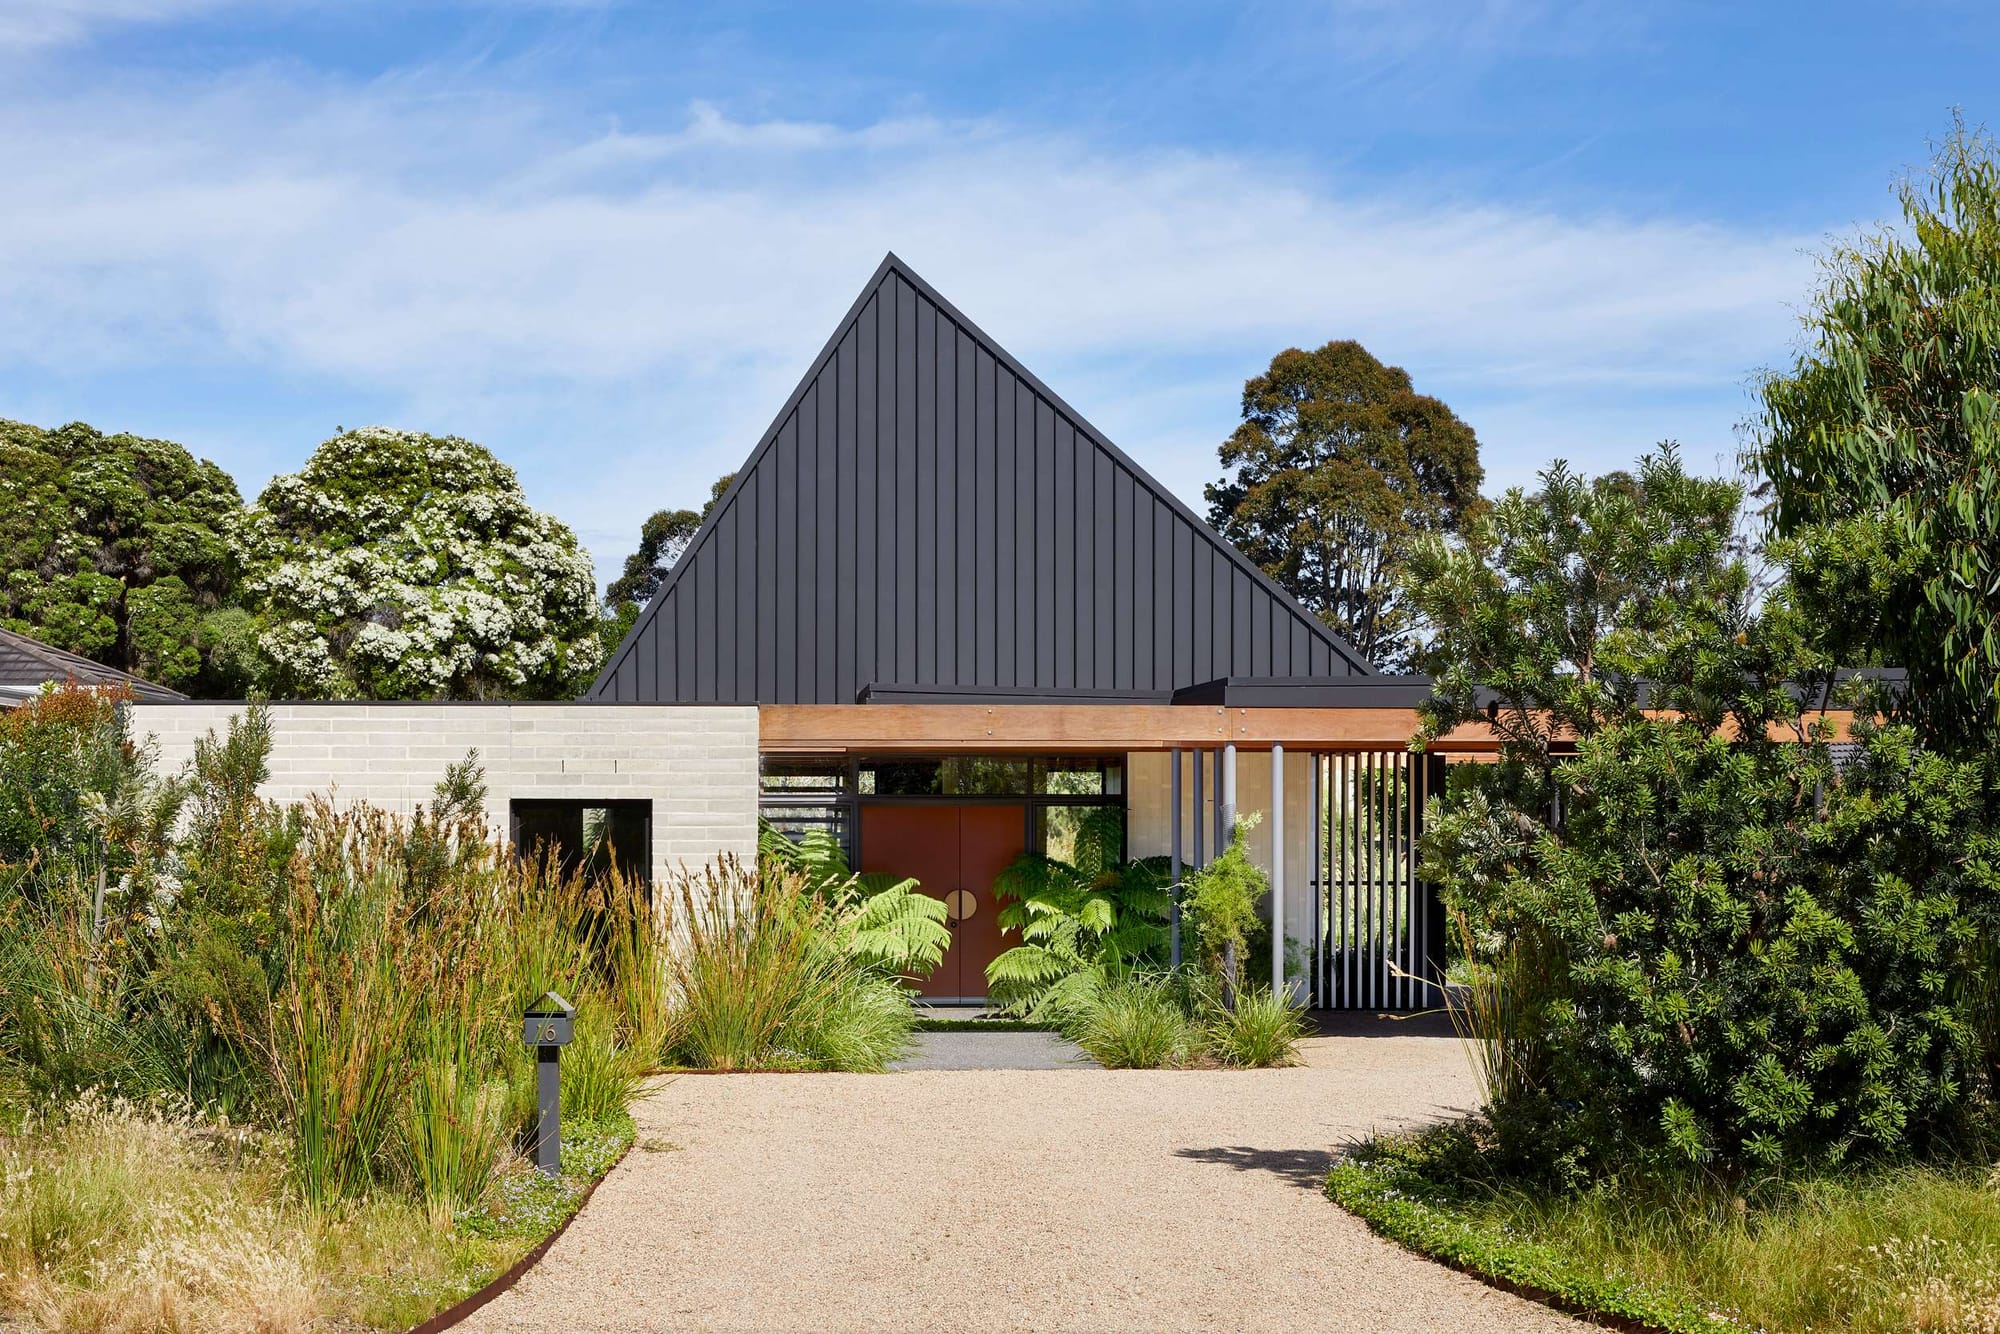 An exterior shot of the front of the house showing the high pitched roof in metal and brickwork walls withe garden surrounding